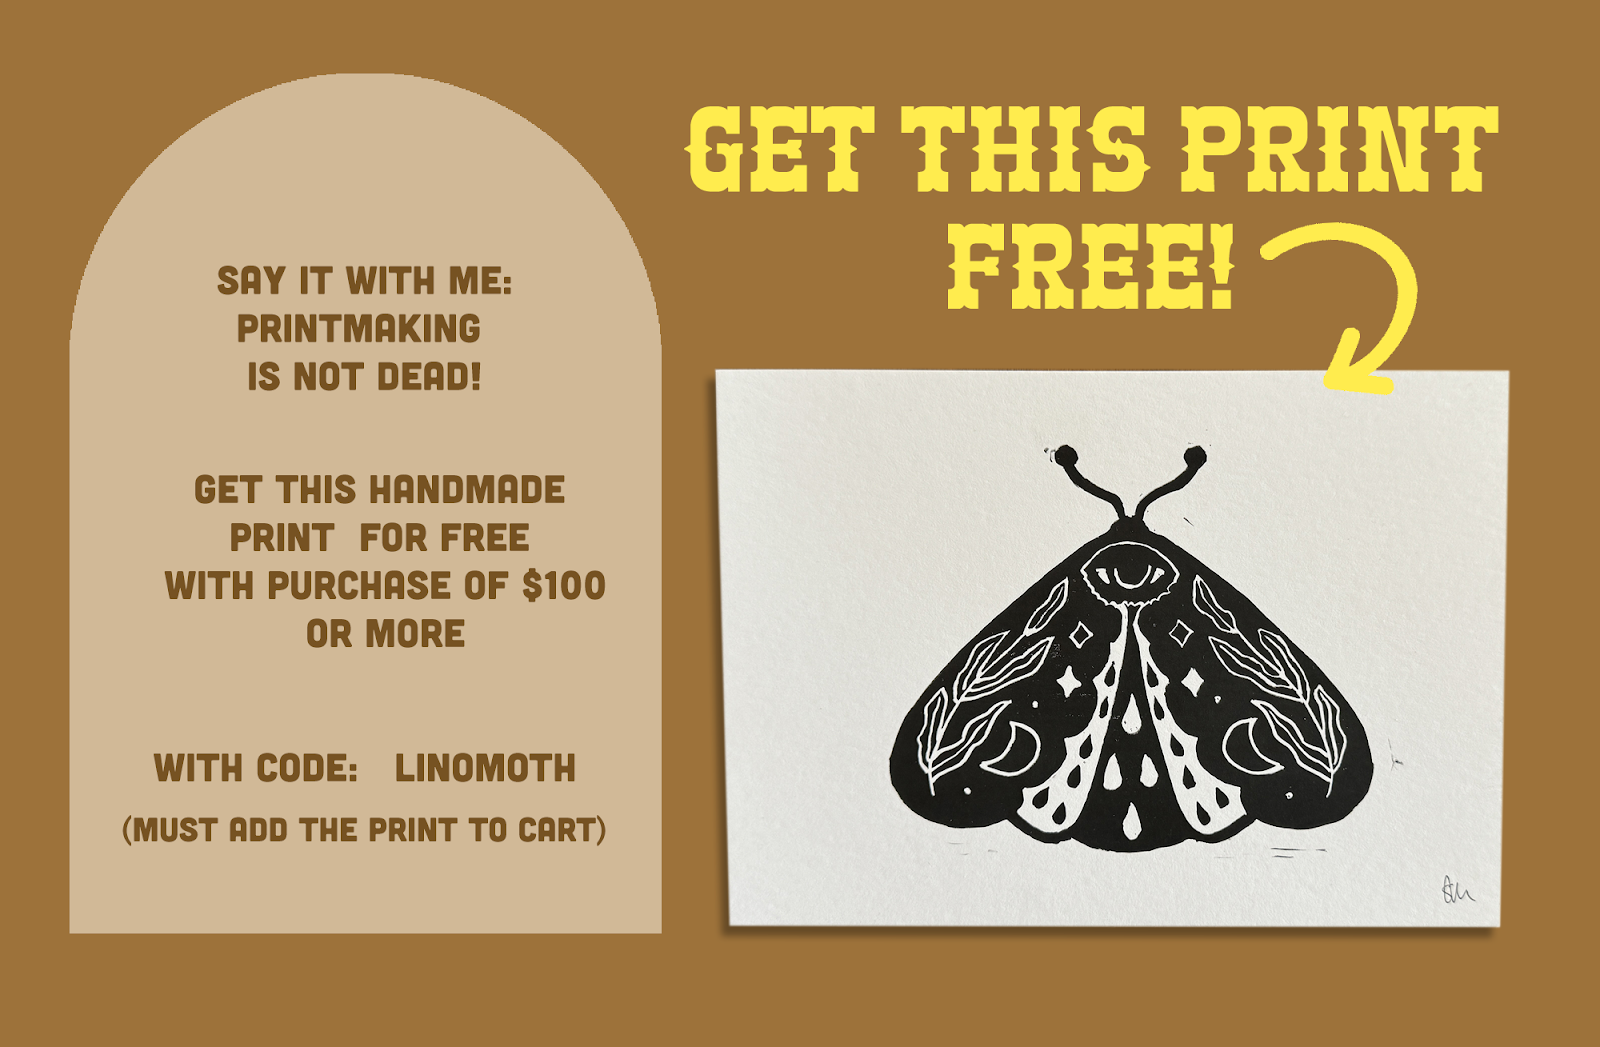 I hand carved and printed these the old school way! Get this moth print for free with purchase